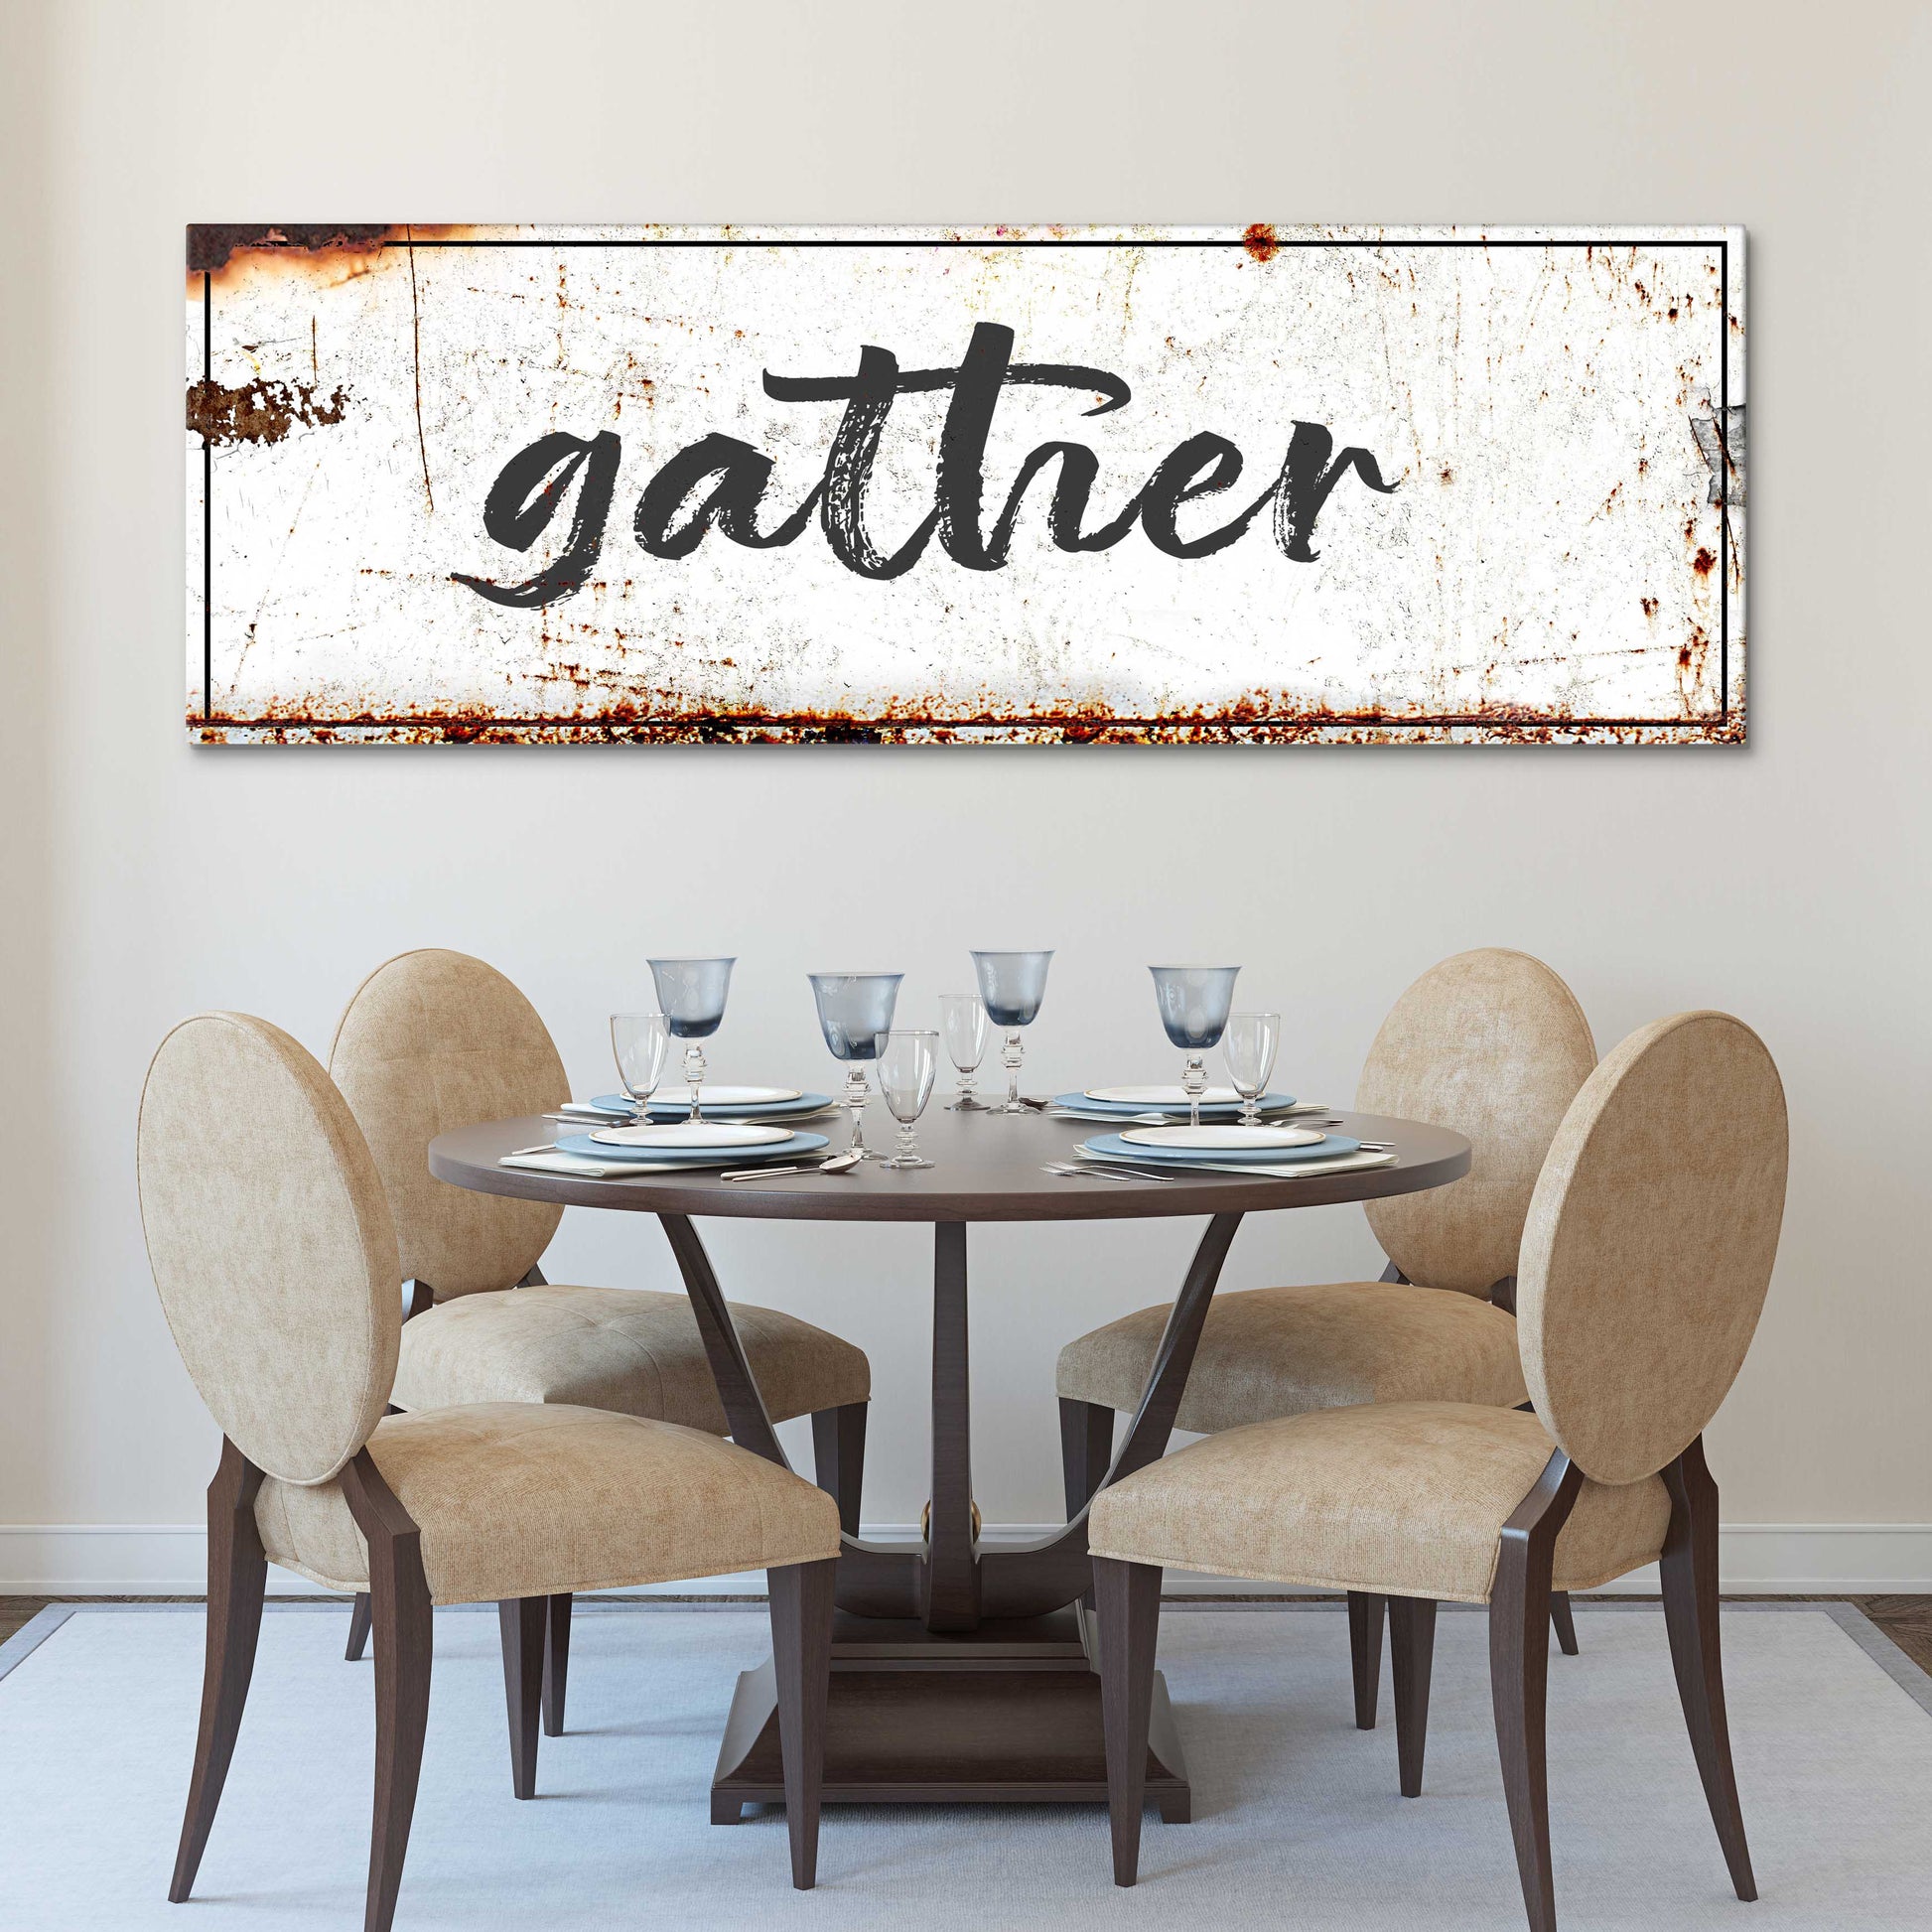 Gather Rustic Sign - Image by Tailored Canvases